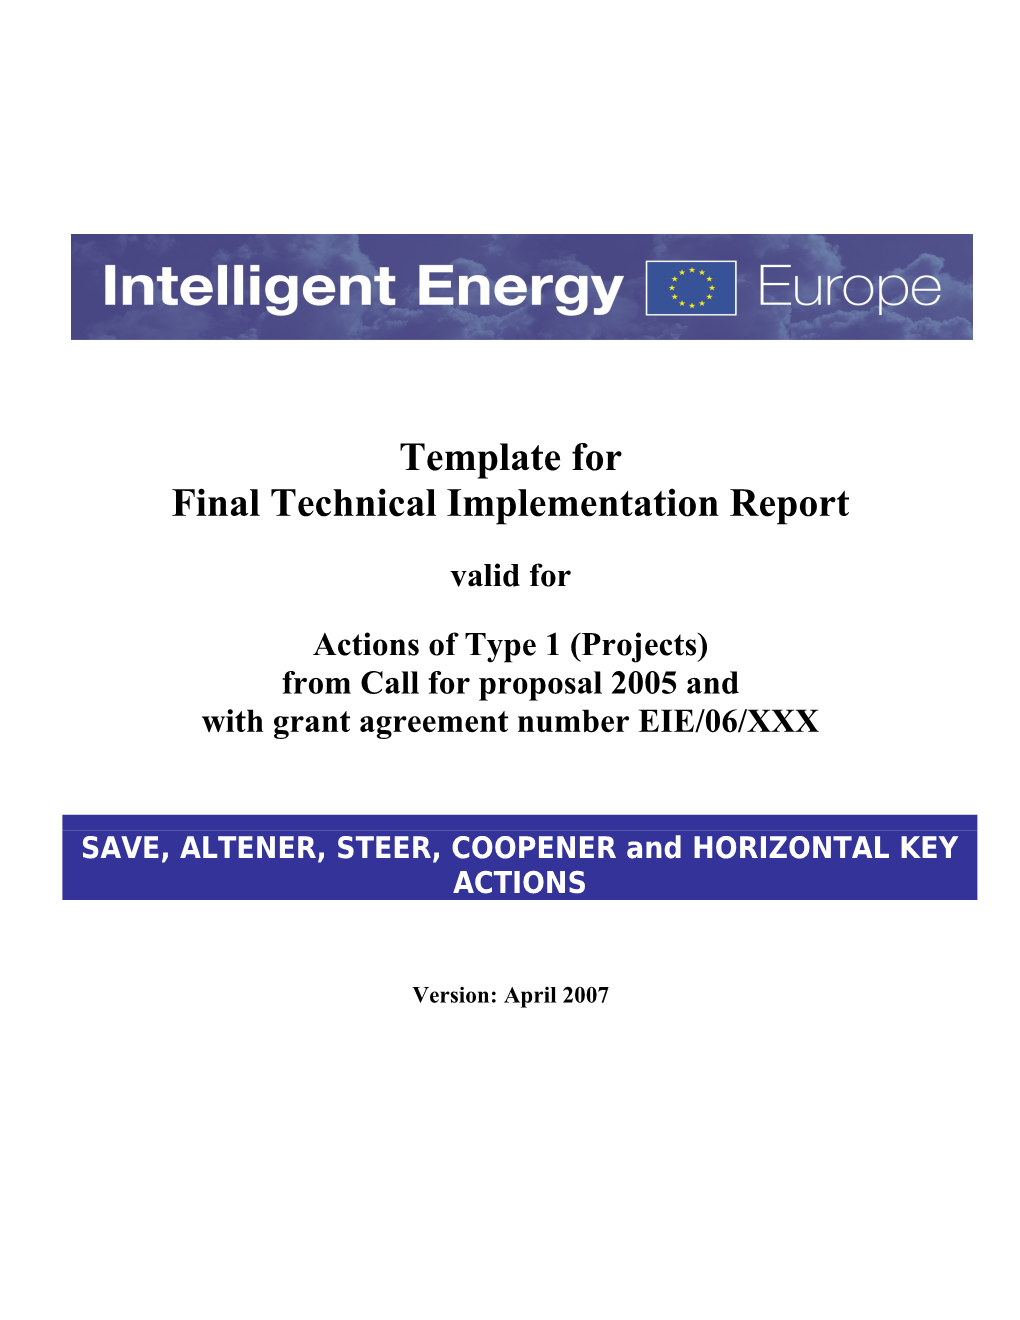 Template for Final Technical Implementation Report (FR), 15-20 Pages